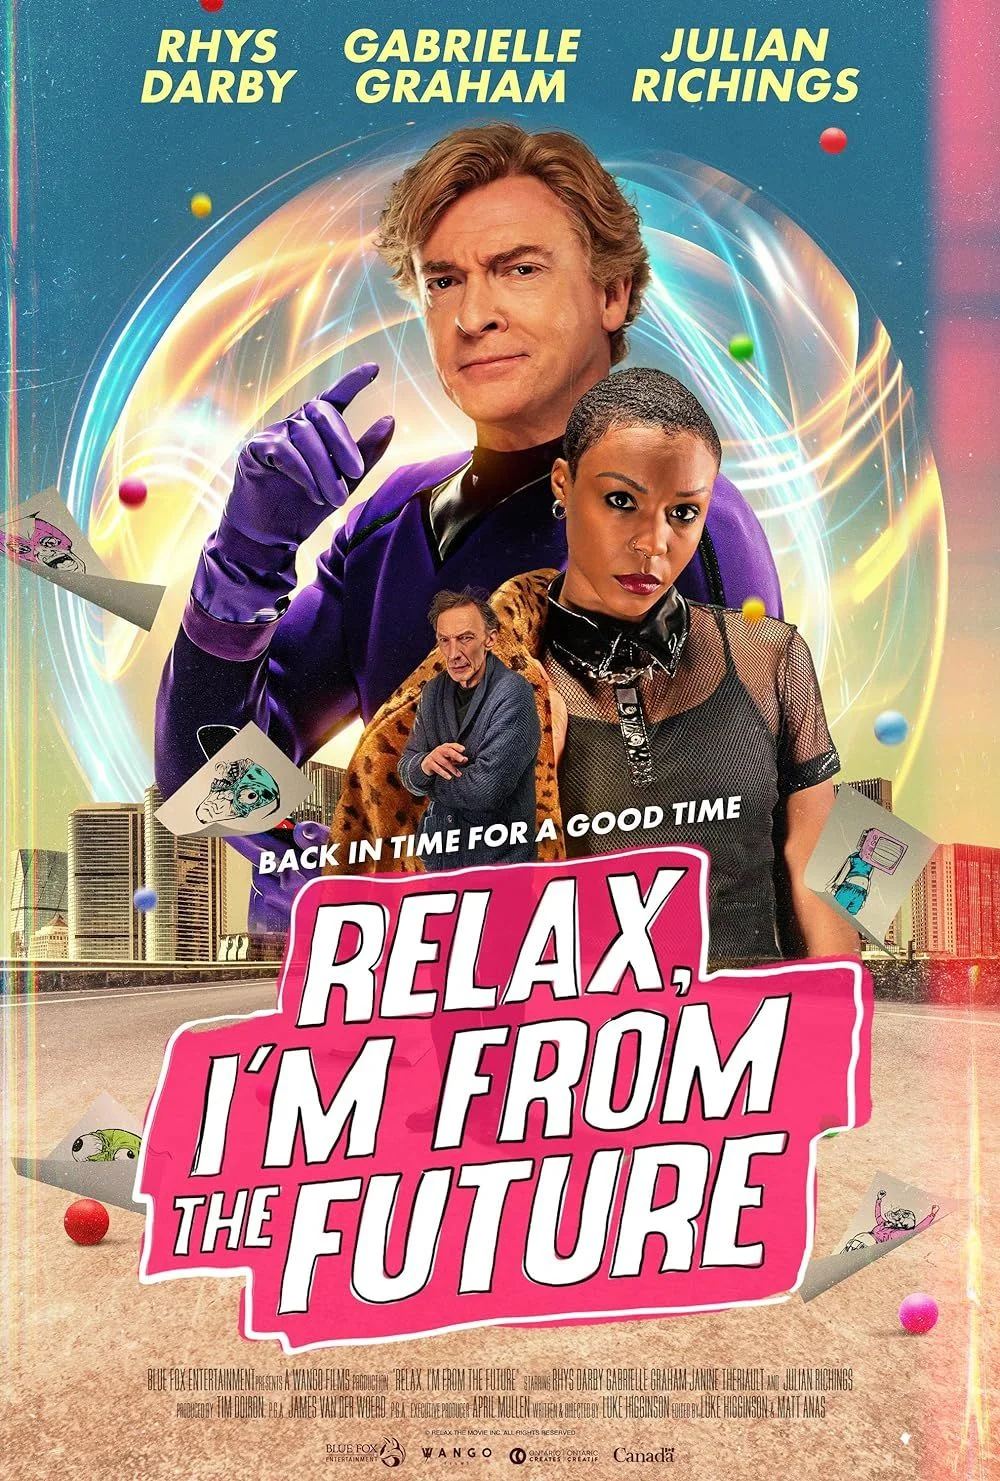 Rhys Darby's 'Relax, I'm from the Future': A Charming Yet Undercooked Sci-Fi Comedy